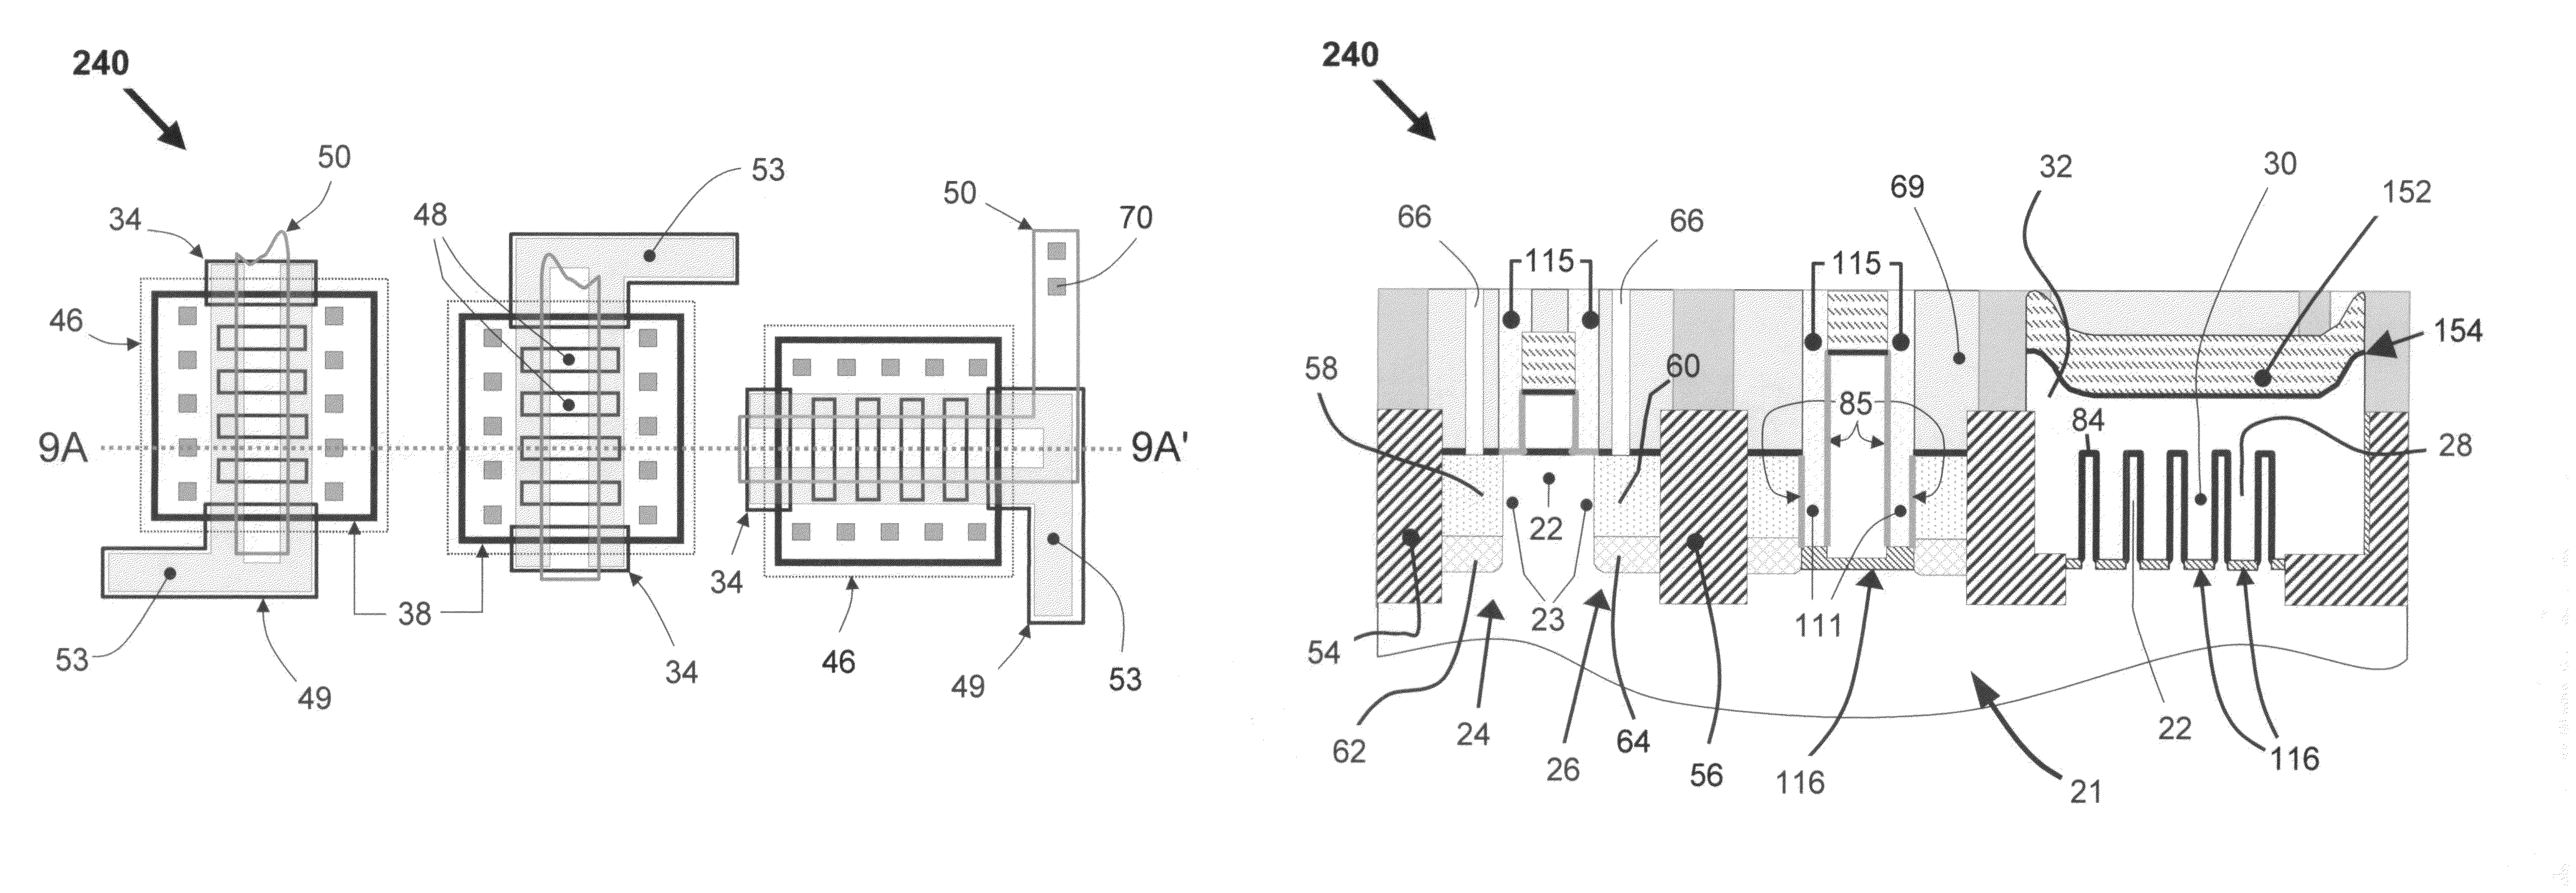 Castellated gate MOSFET tetrode capable of fully-depleted operation